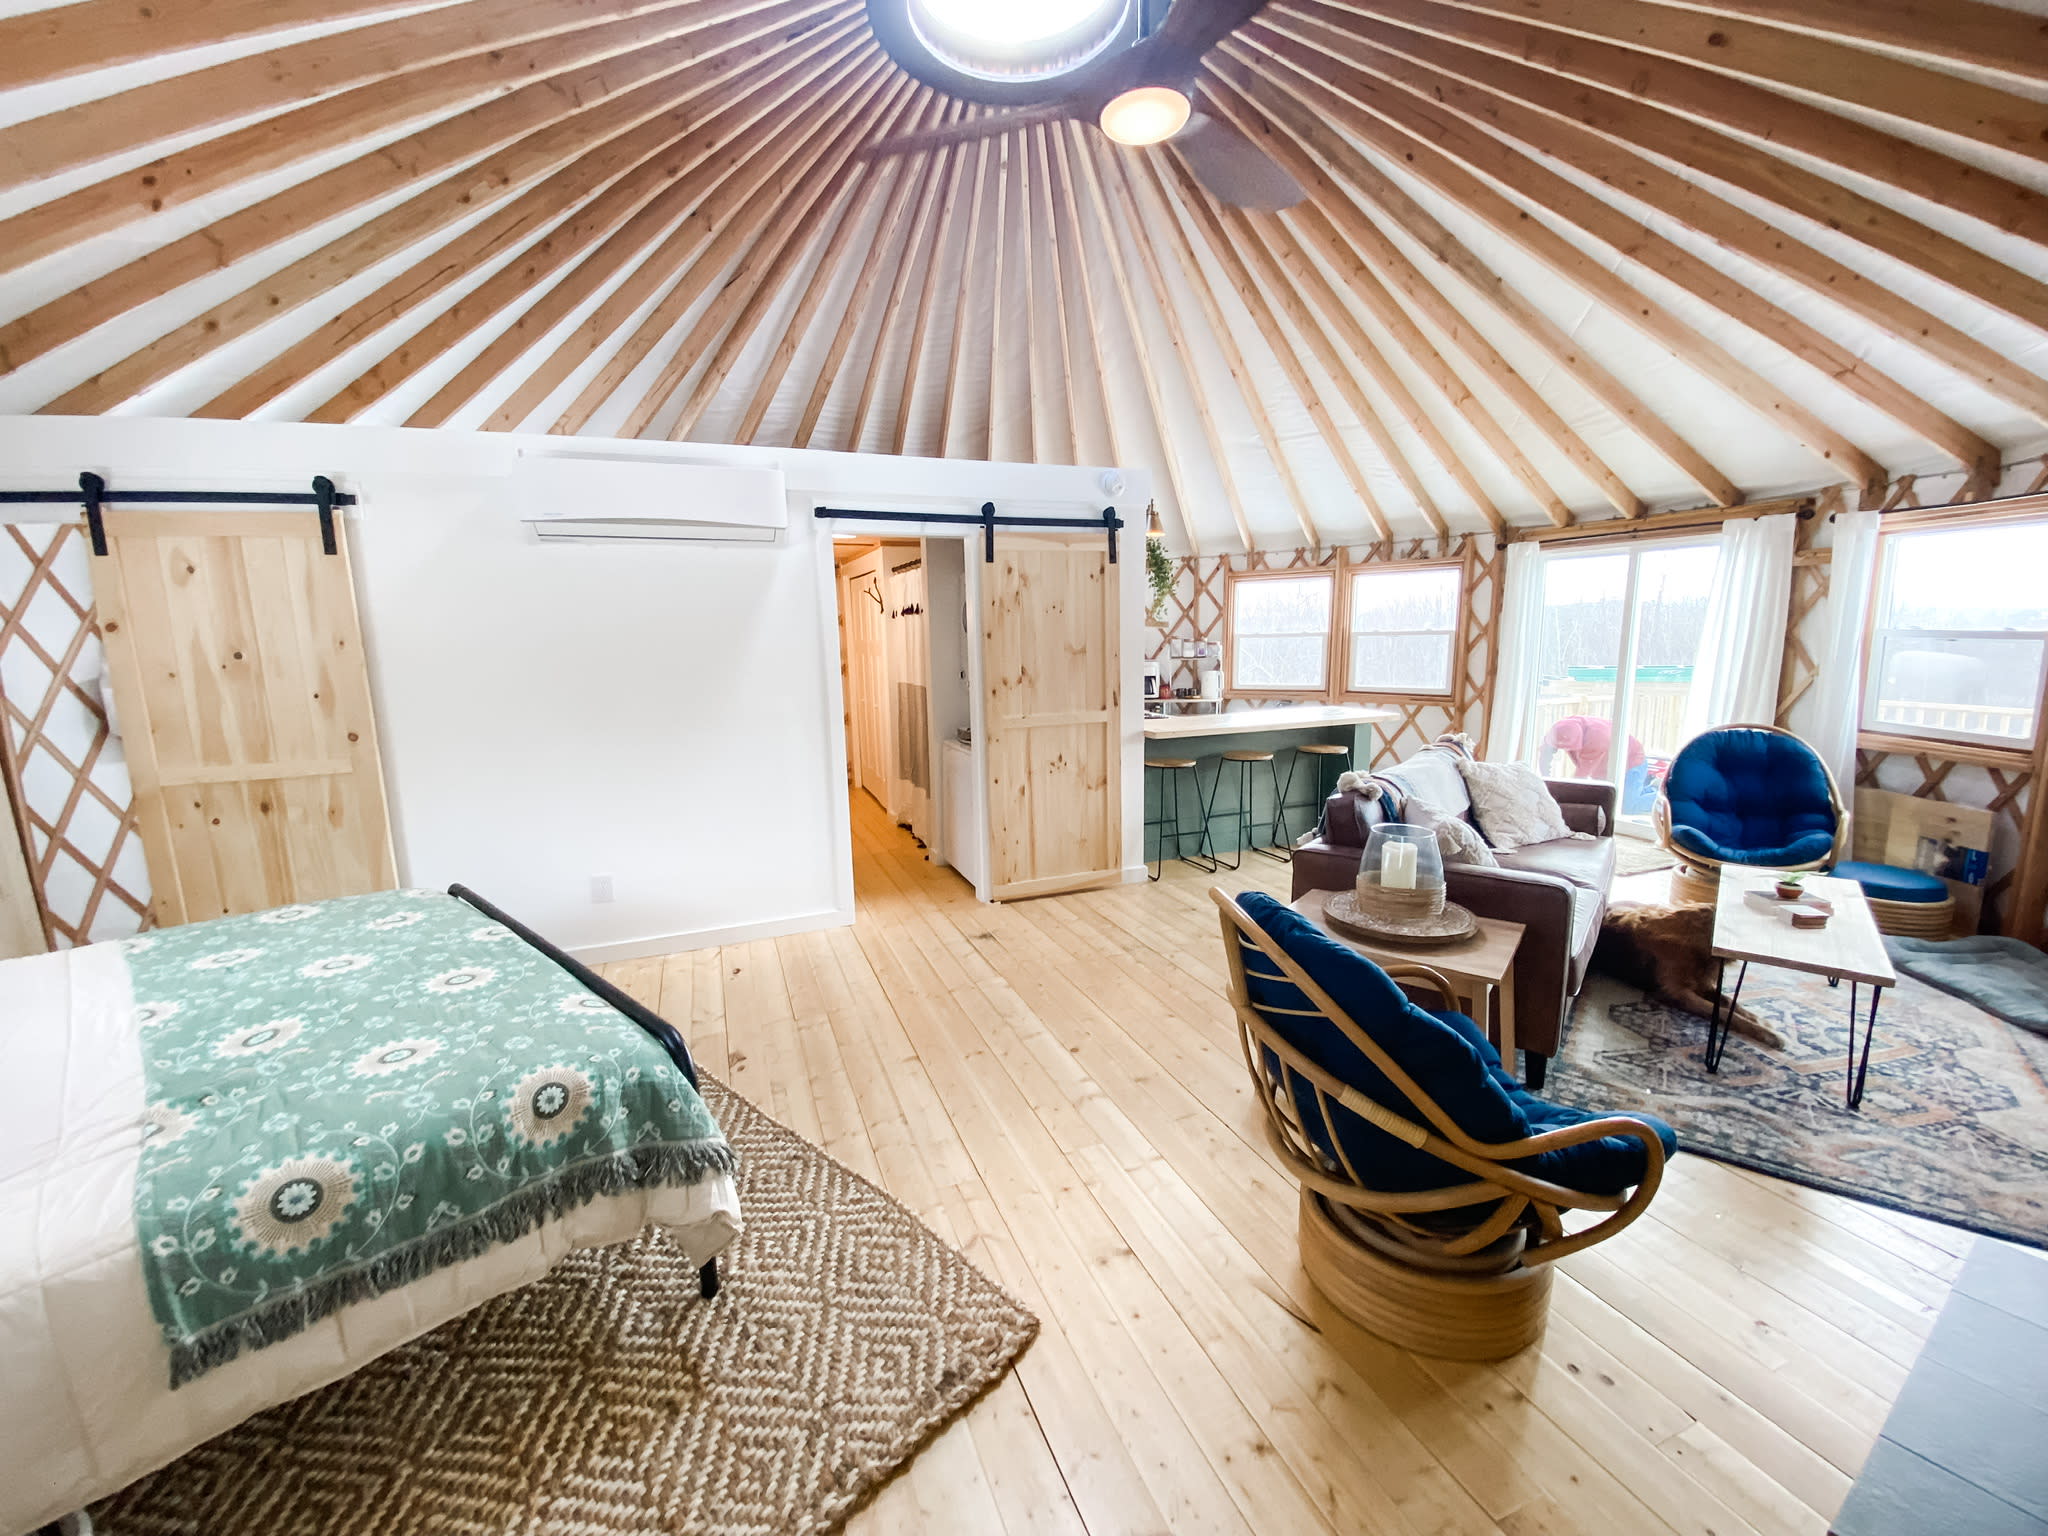 When you walk into the yurt you will be surprised by how spacious the yurt is!